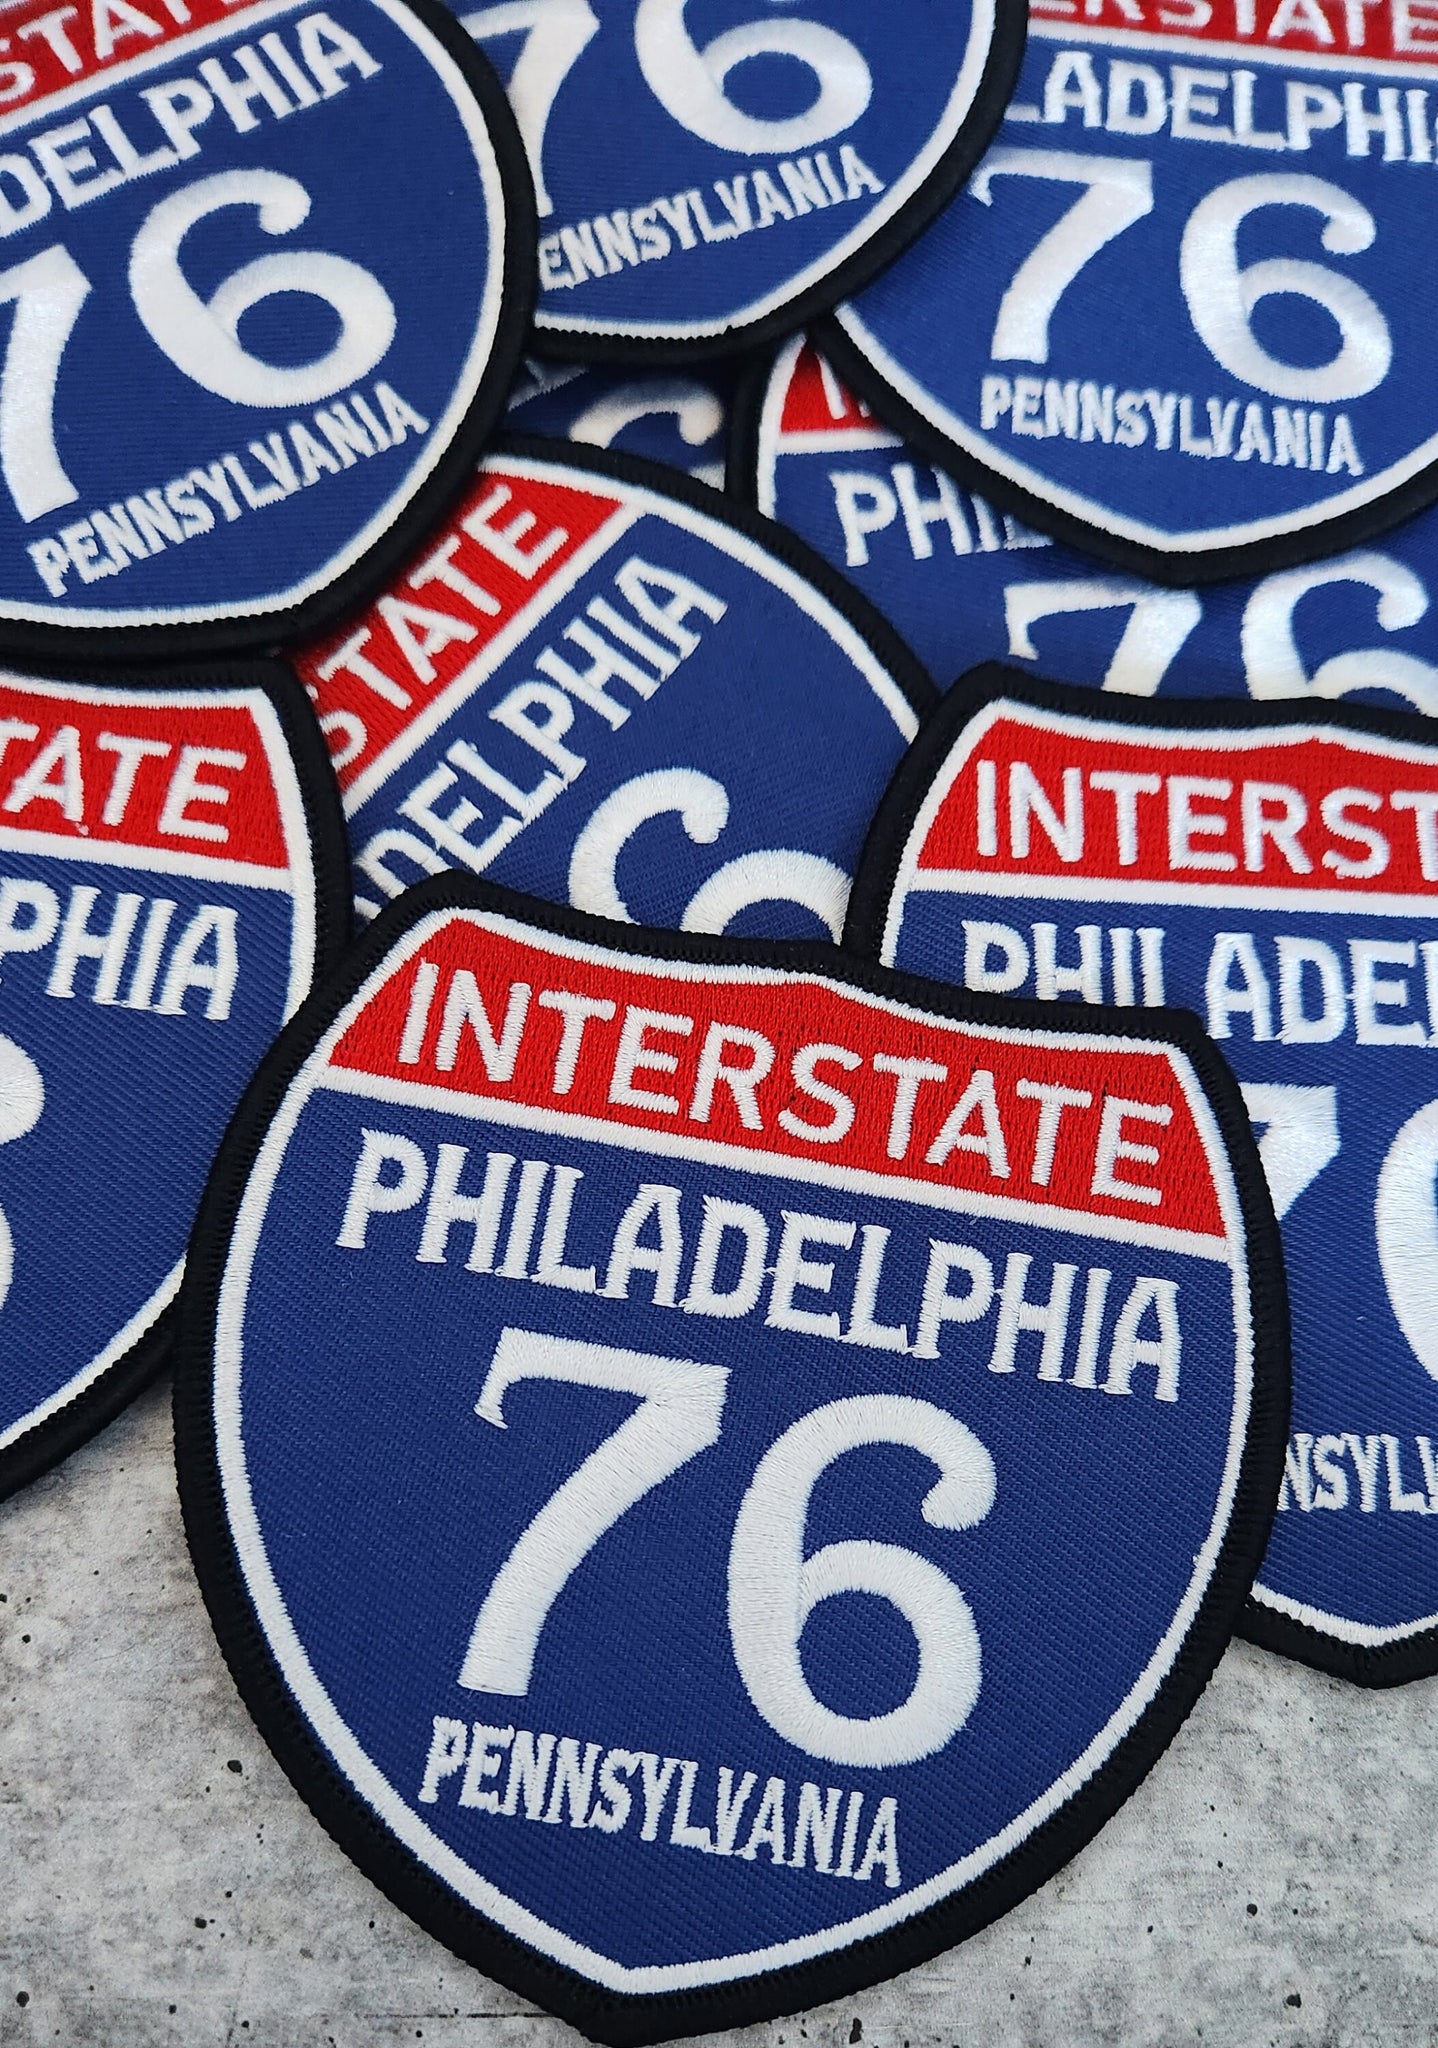 Collectable 1-pc, "PHILADELPHIA 4" Interstate 76"  Iron-On Embroidered Patch; Popular Pennsylvania Emblem, Red/White/Blue Badge, Patch for J